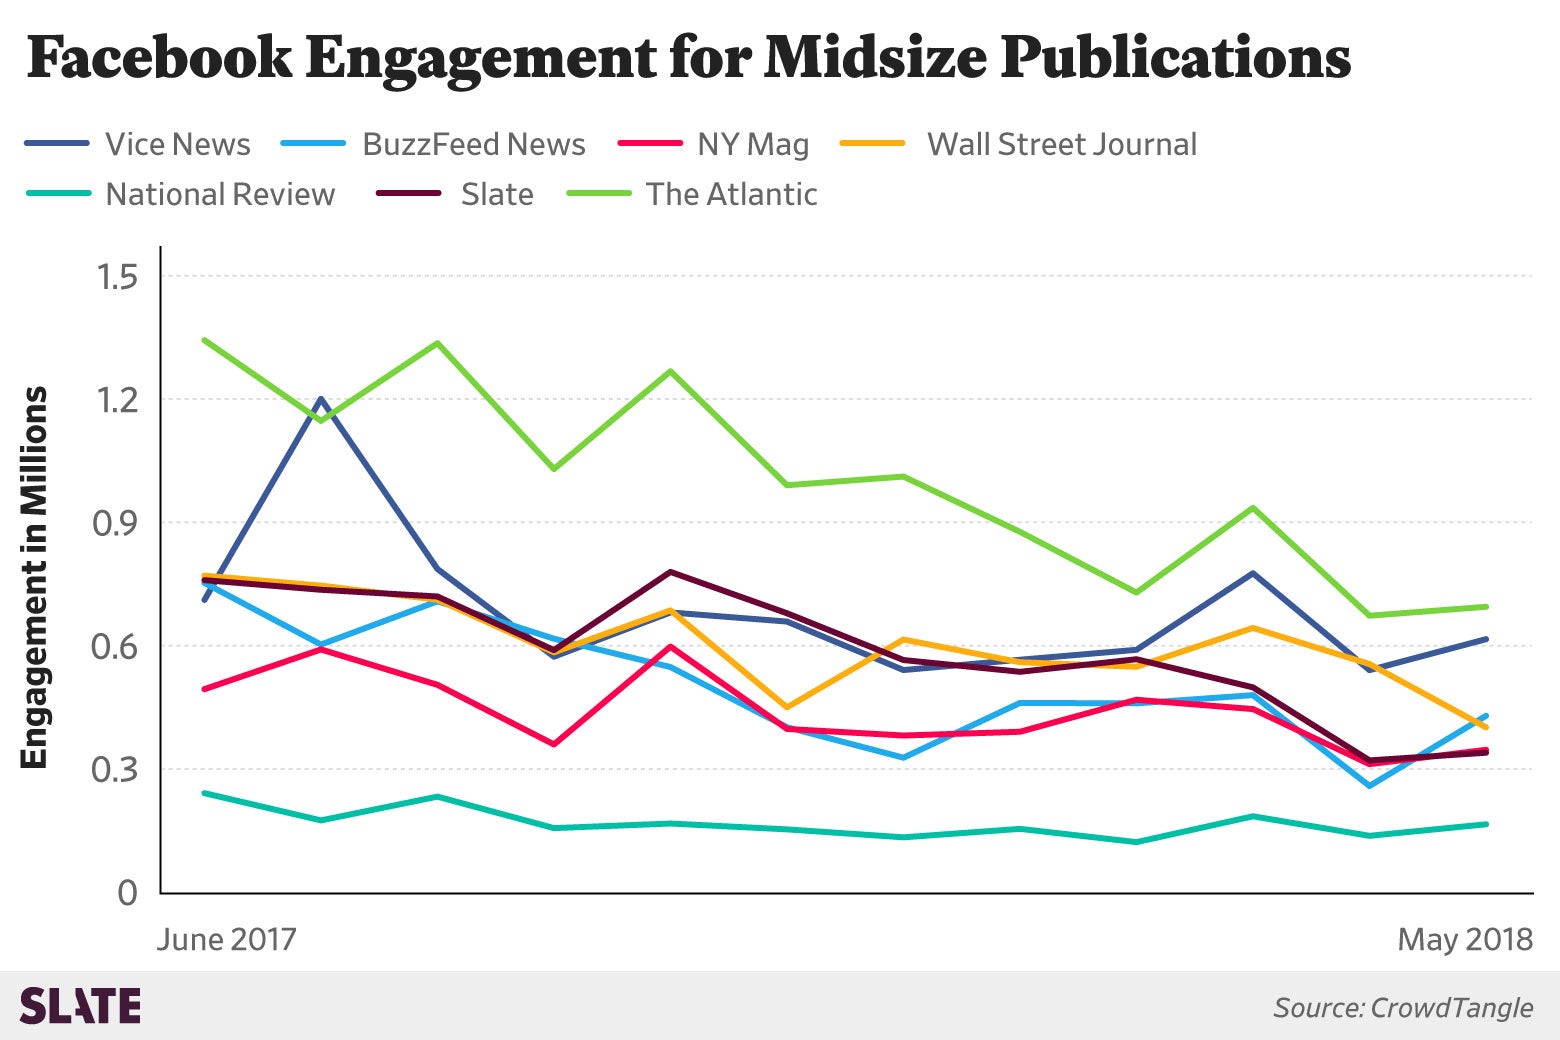 A chart show Facebook engagement for midsize publications, including Vice News, BuzzFeed News, NY mag, Slate, and others. All trend downward.